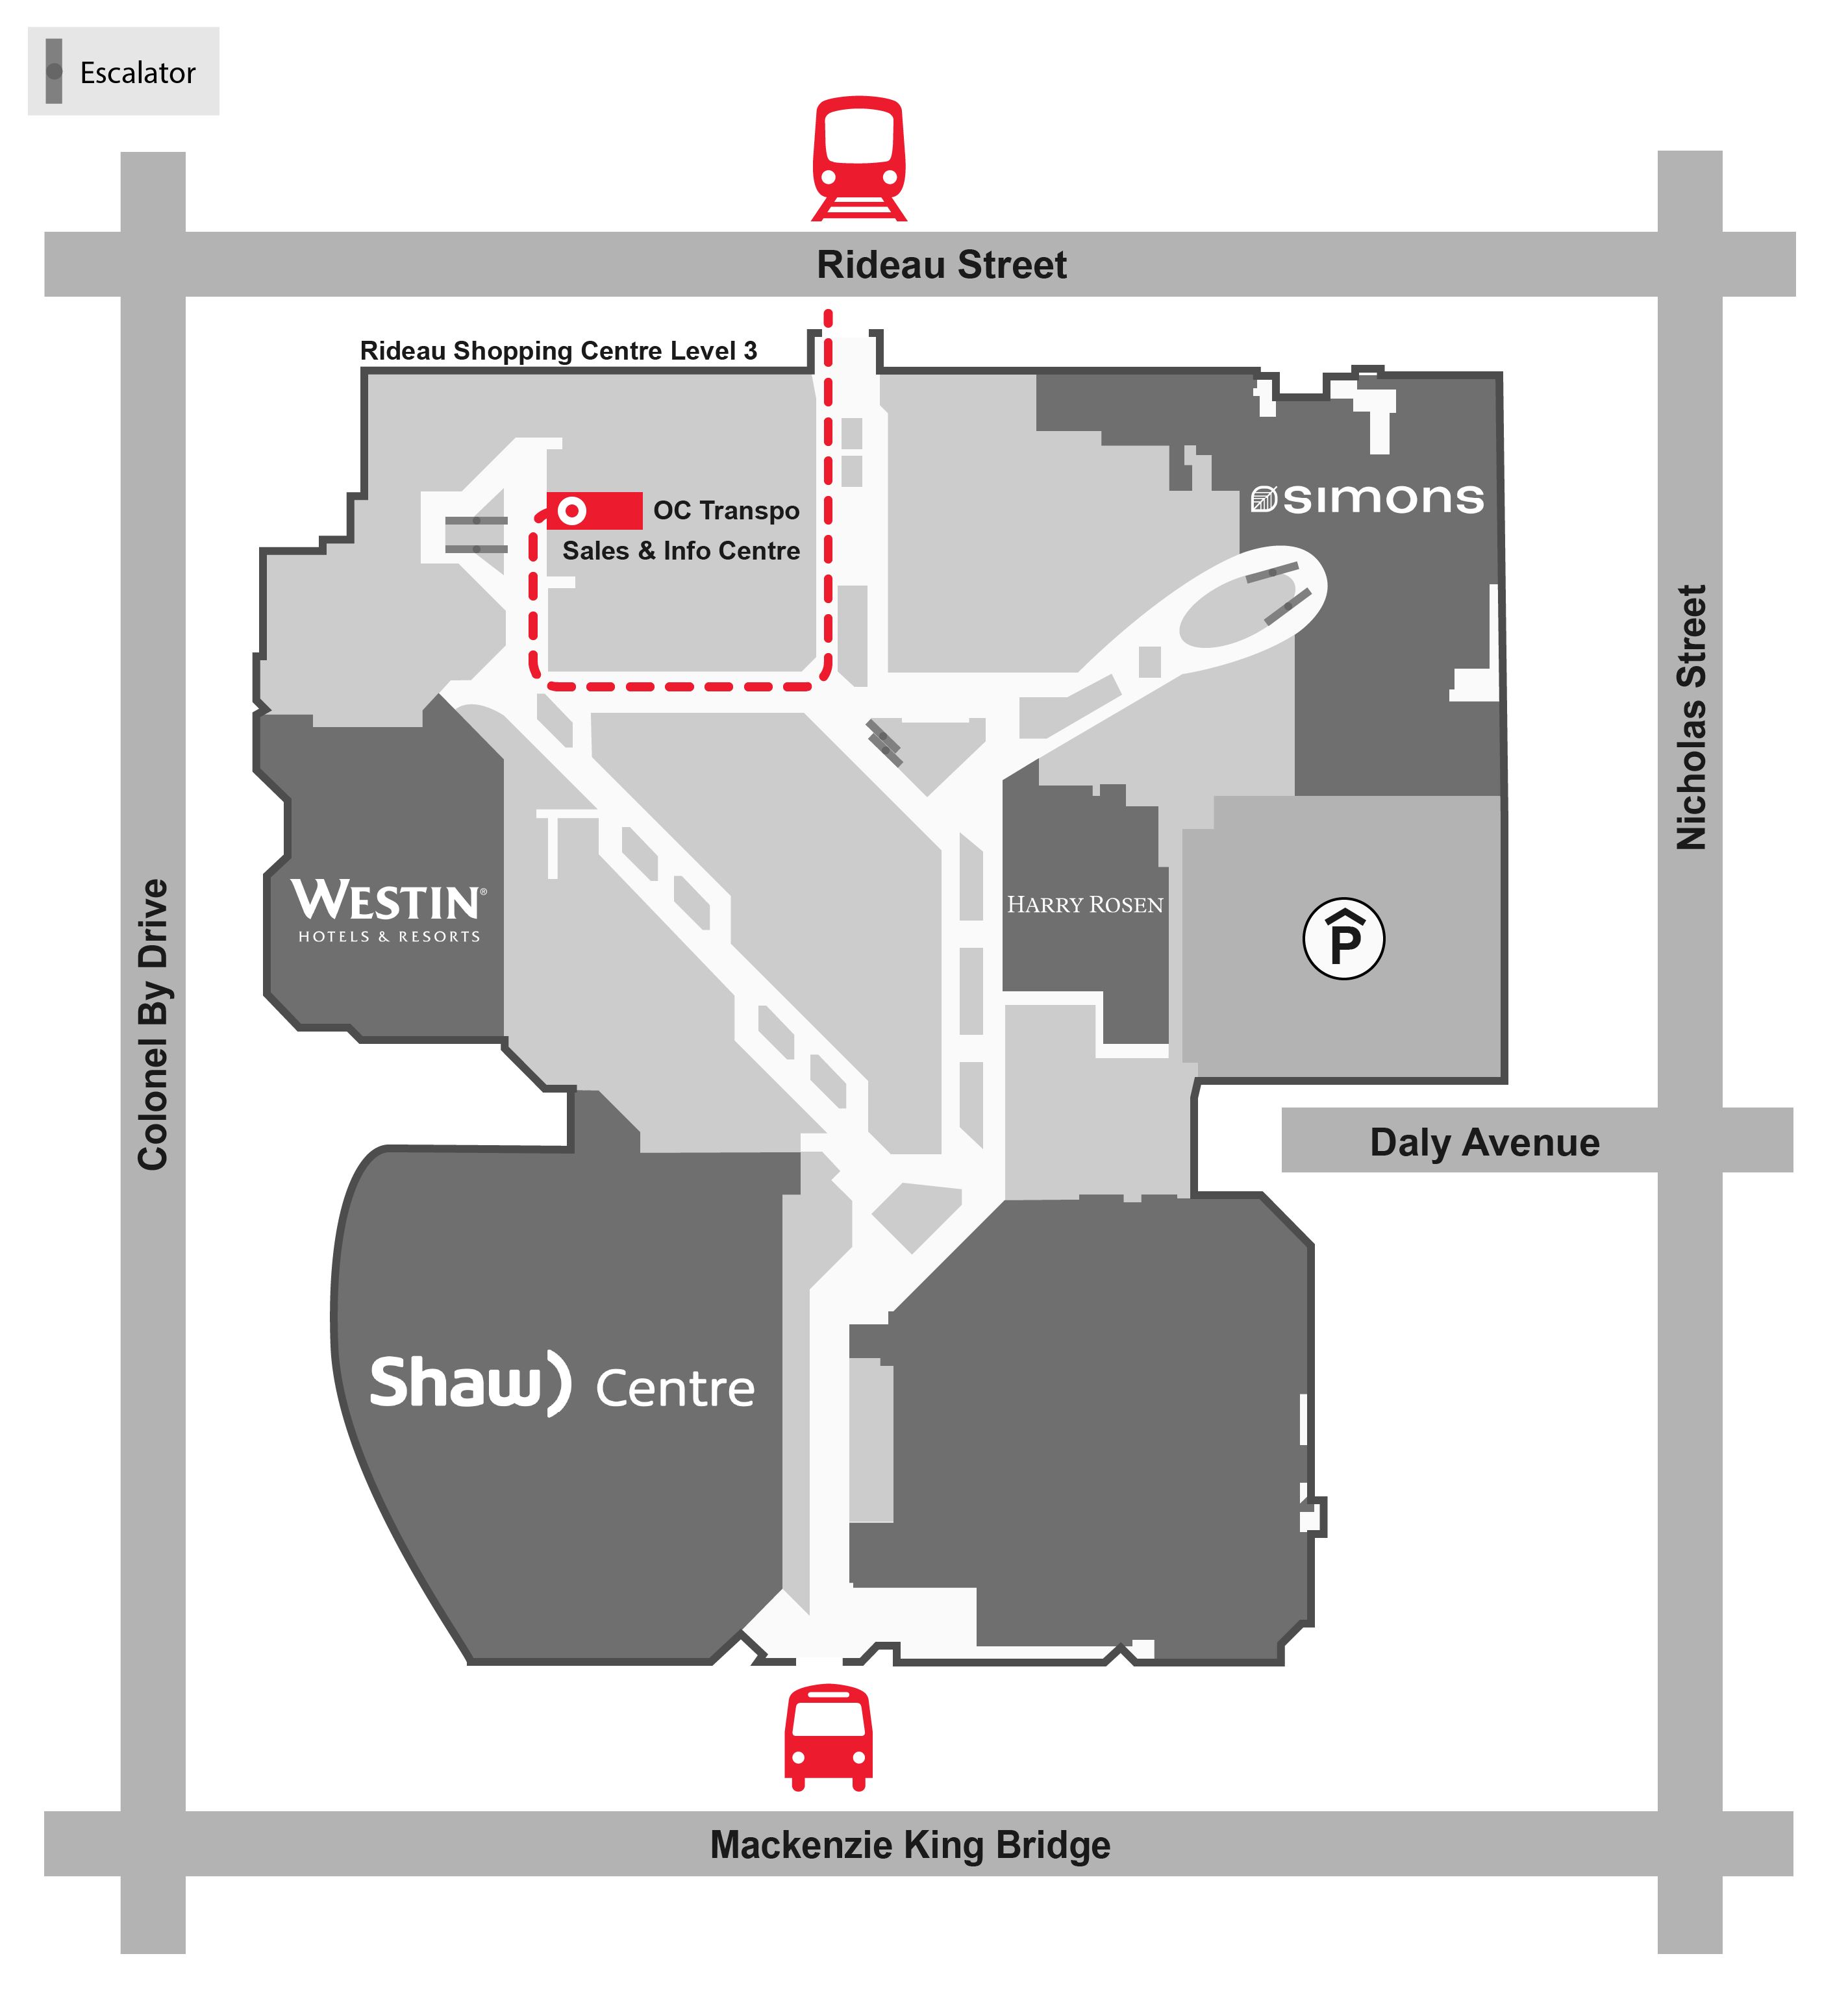 The OC Customer Service Centre at Rideau Centre is located on the 3rd floor, at the end of the escalator (slight left) when coming in from Rideau/Sussex entrance.